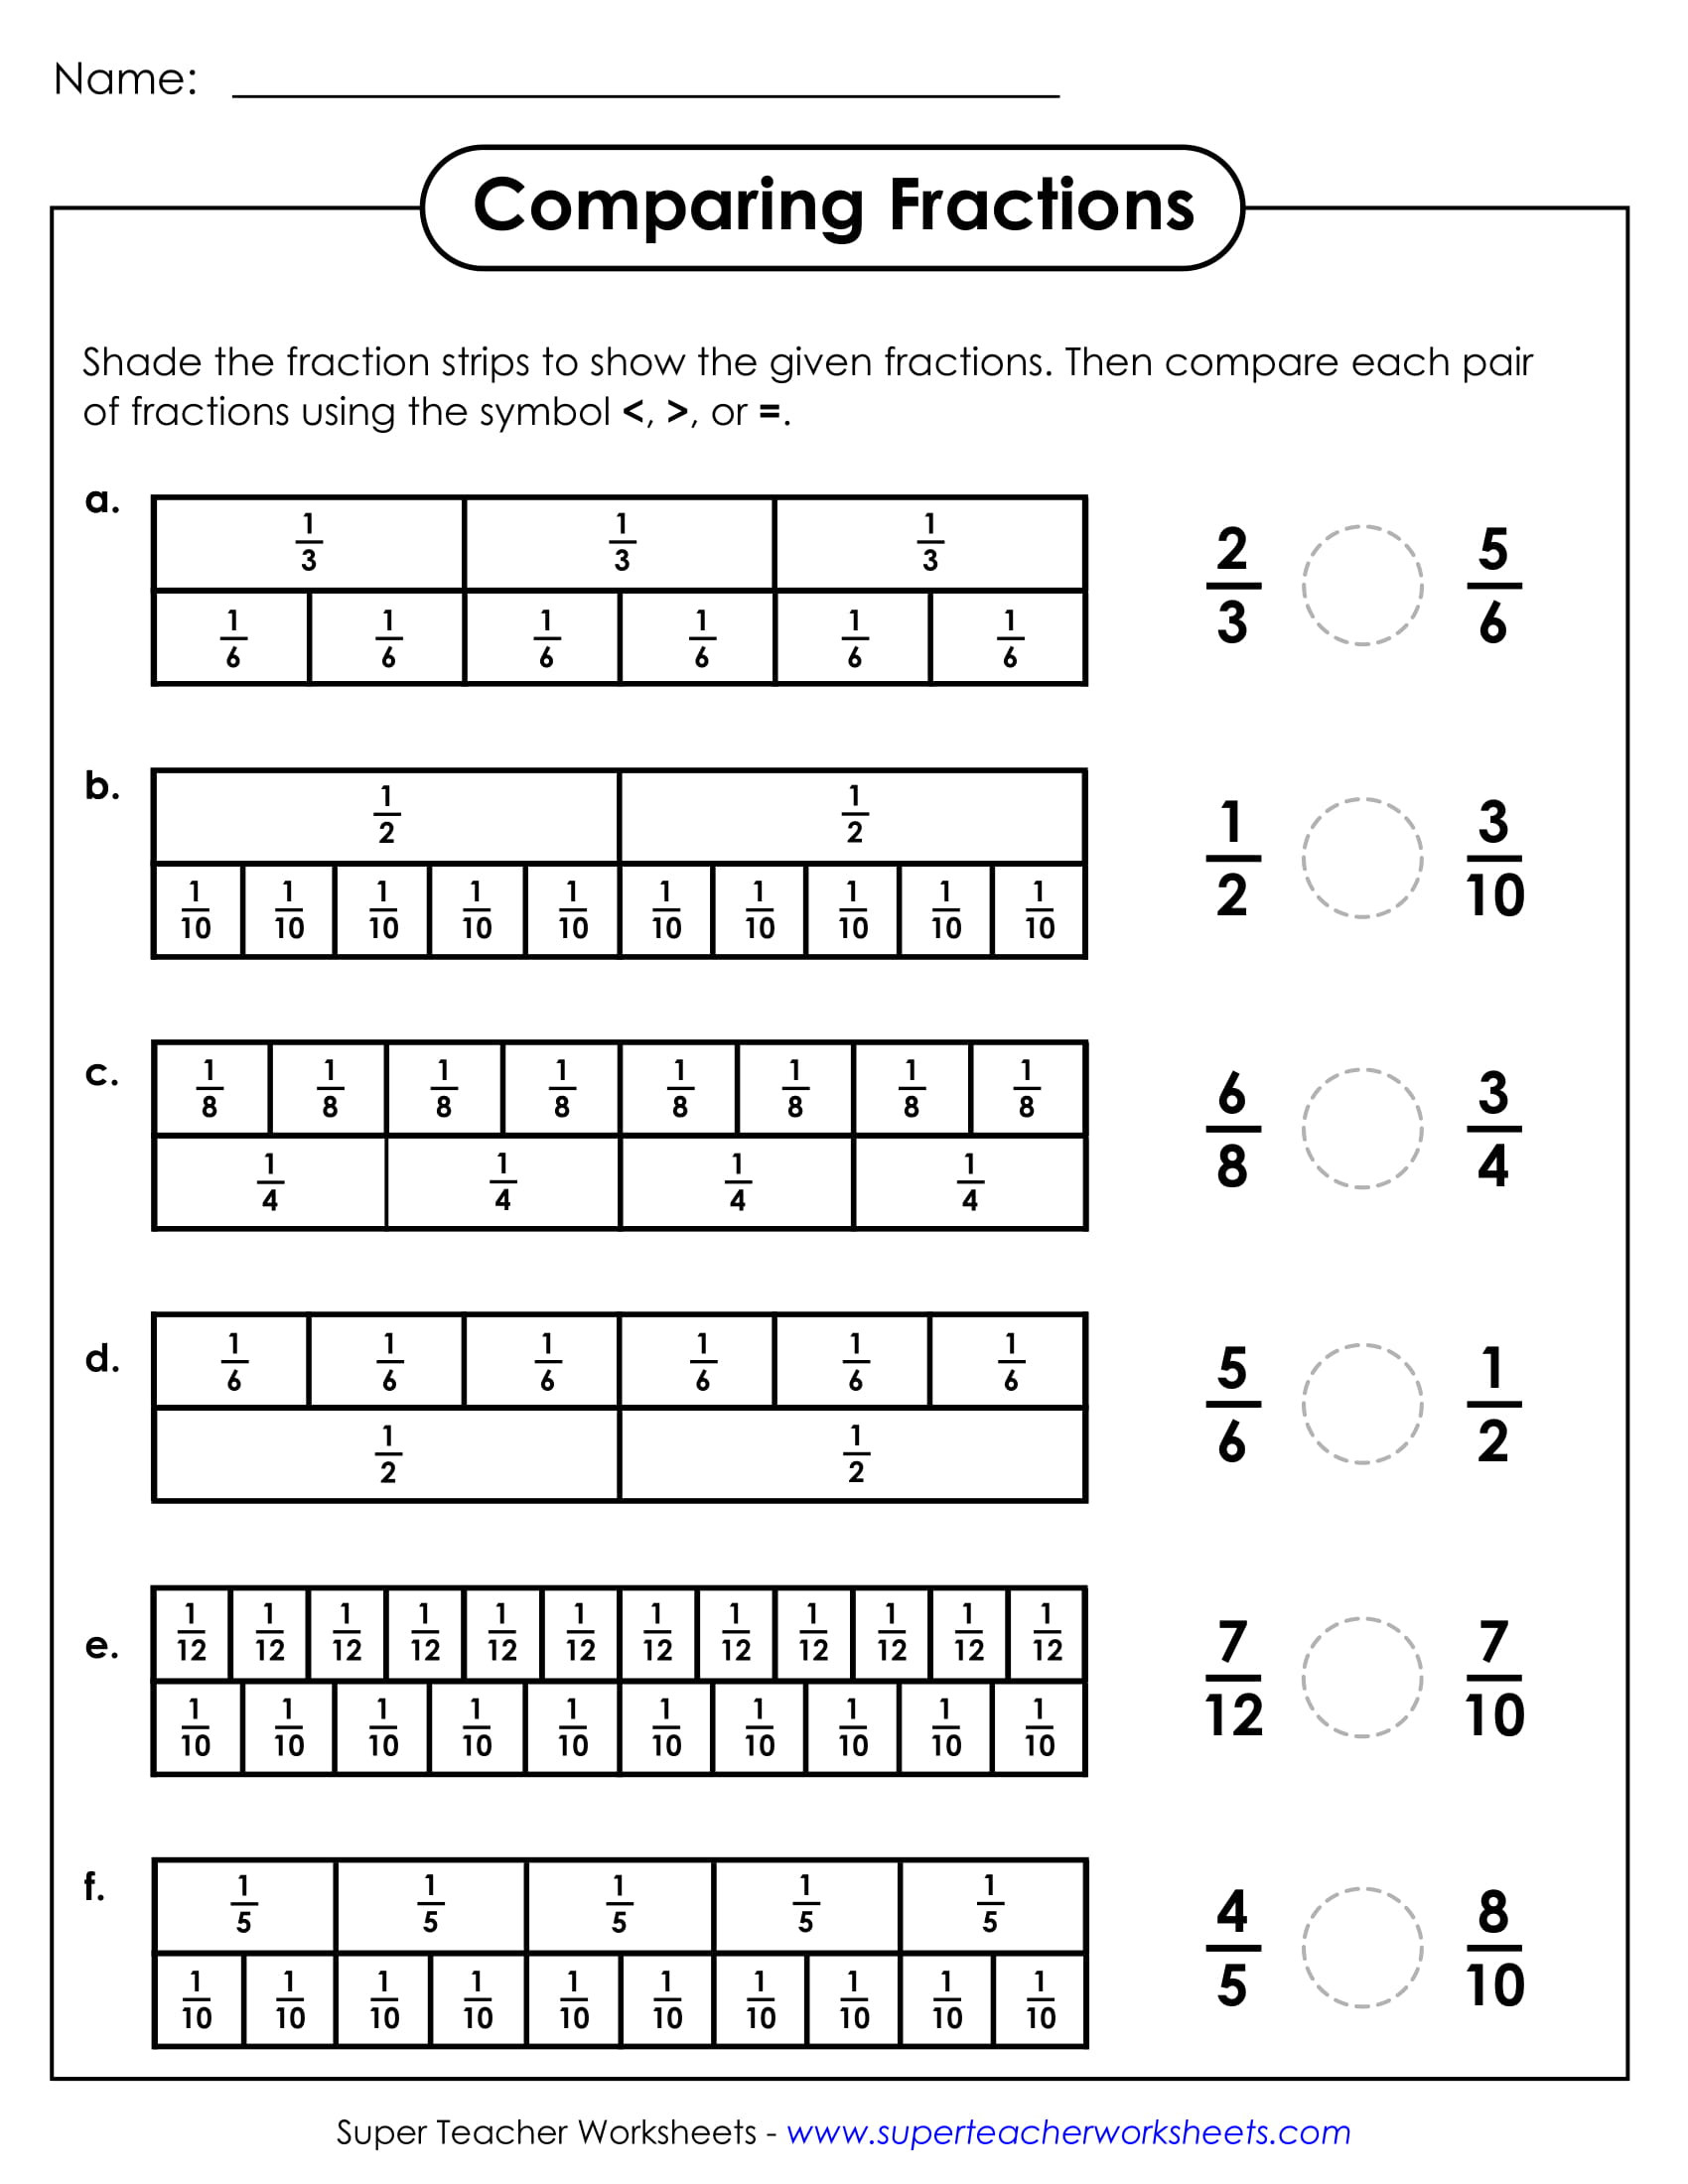 Equivalent Fractions Worksheet Pdf Fraction Worksheets Examples Pdf Fractions In Everyday Life